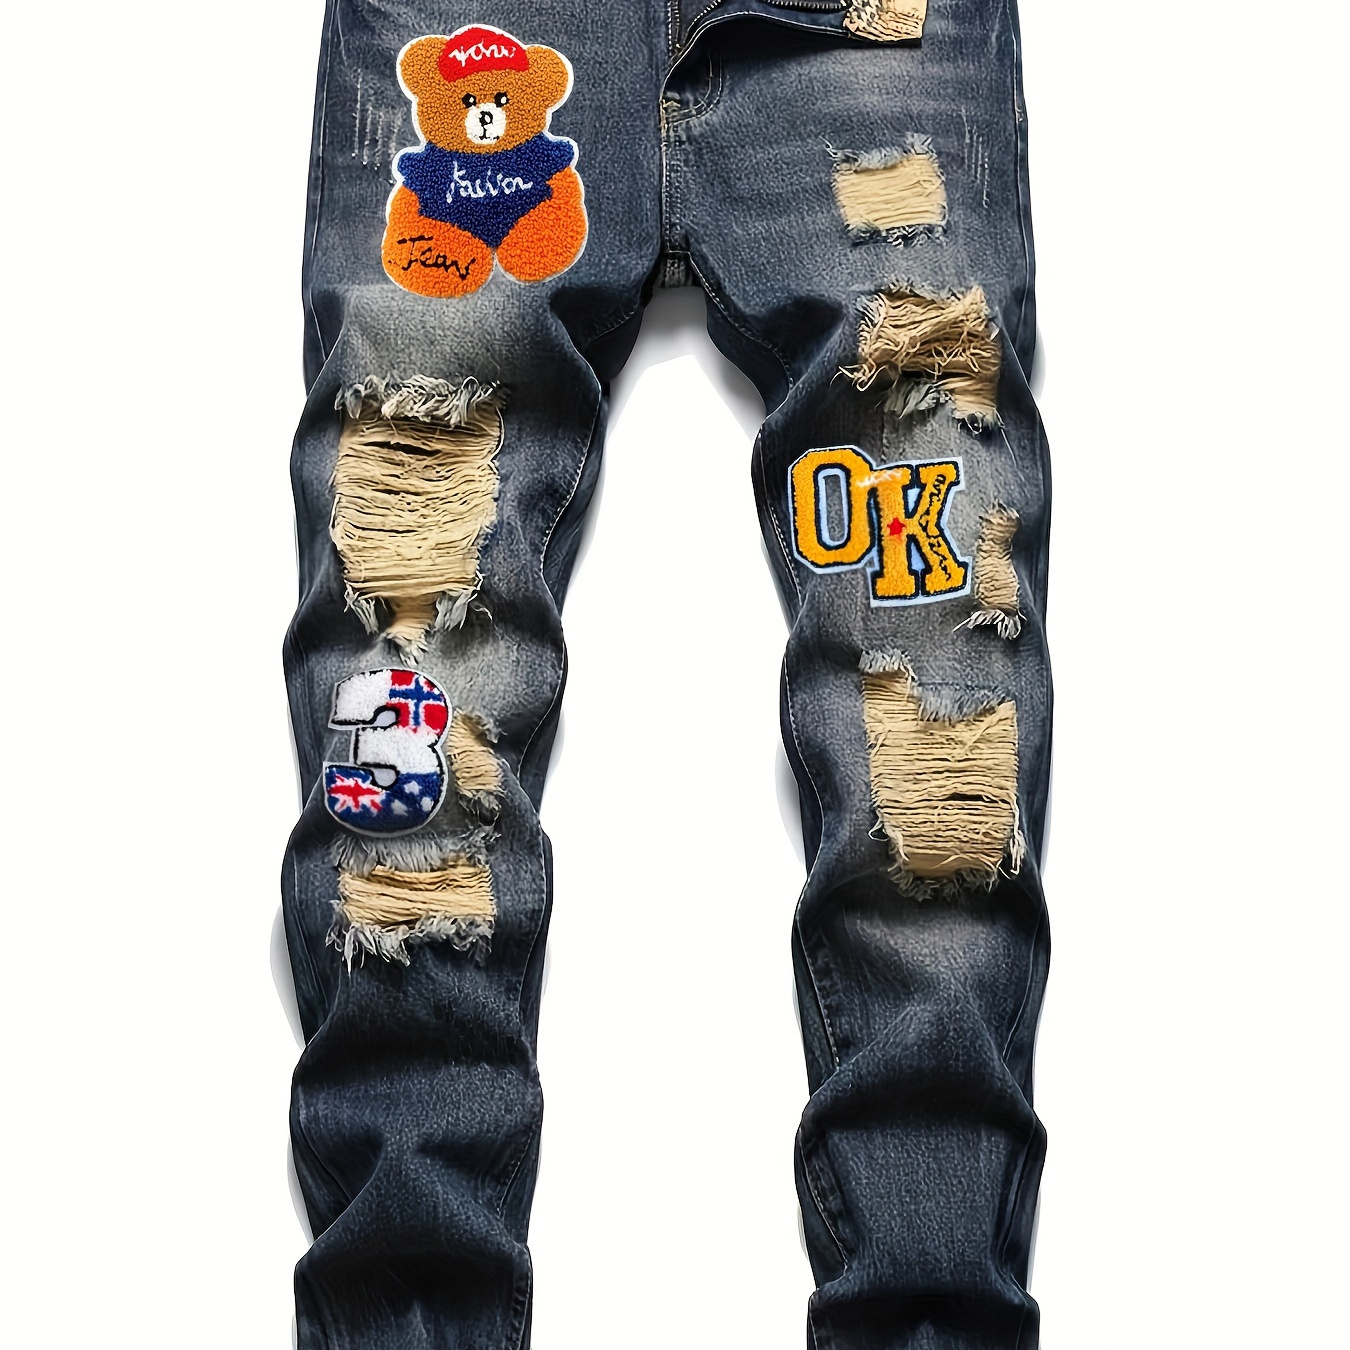 

Men's Casual Embroidery Jeans, Chic Street Style Distressed Denim Pants